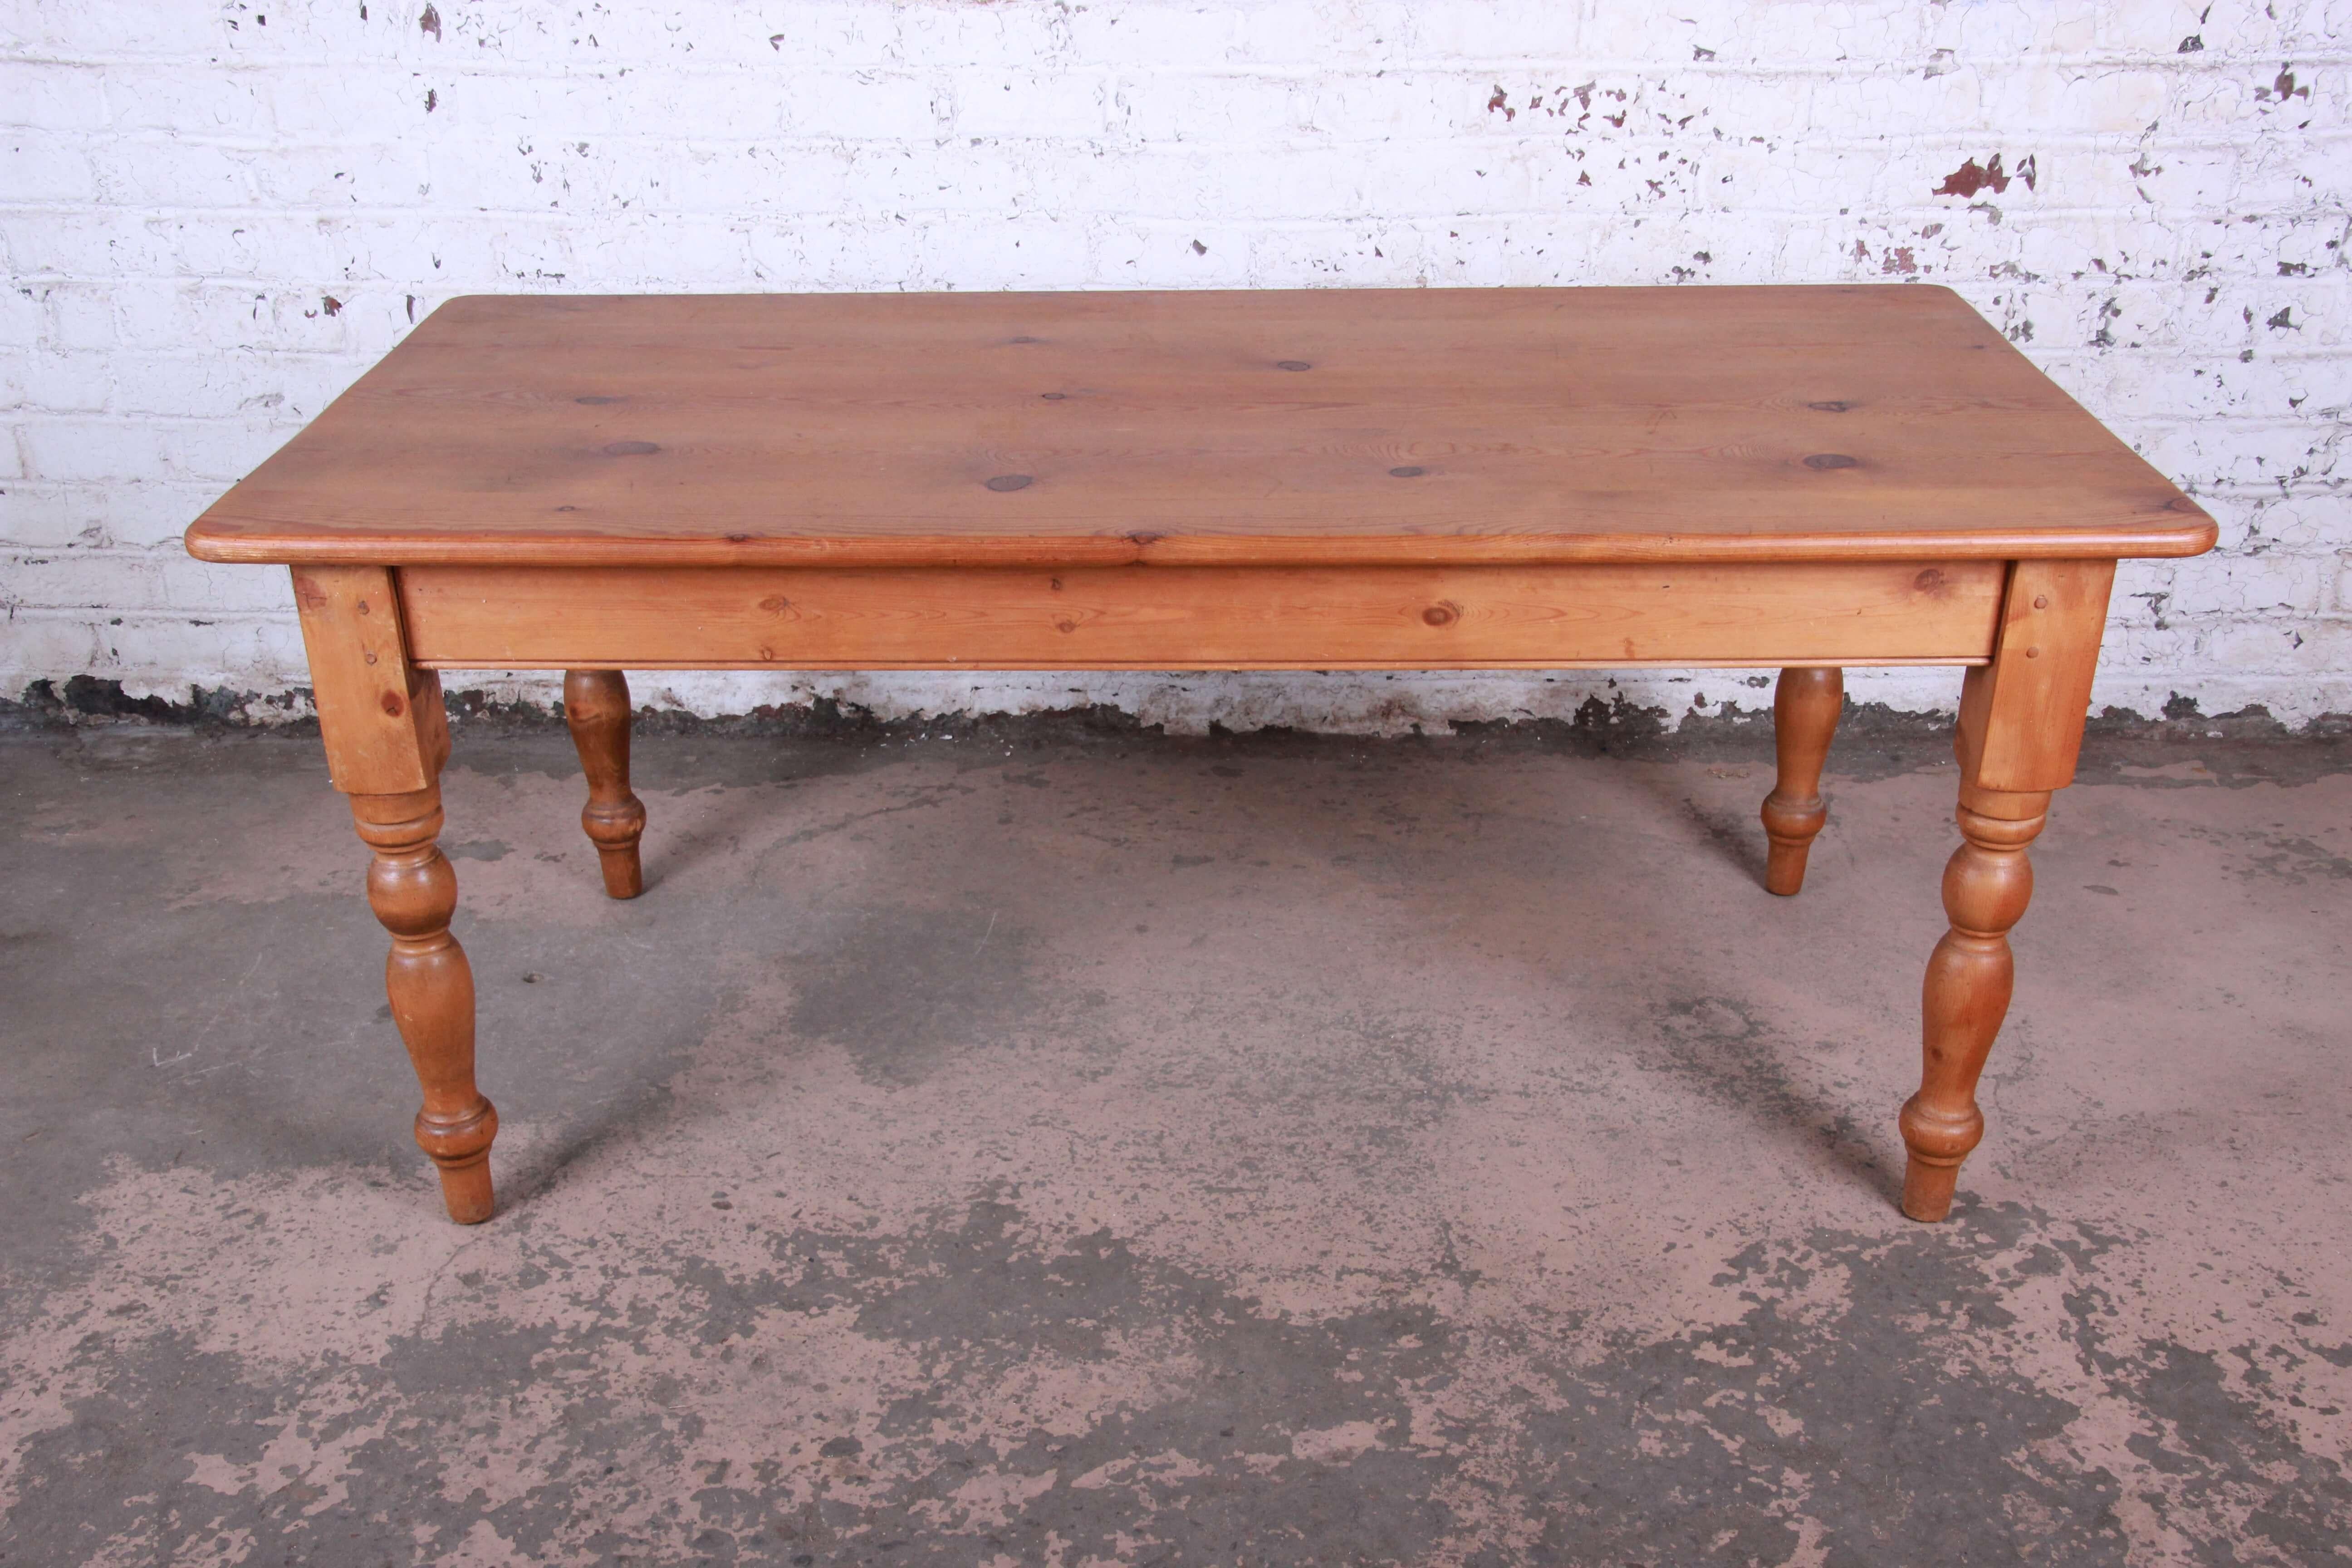 Offering a nice Primitive style English pine harvest table. The harvest table has a solid knotty pine top which is sturdy and solid with a nice Primitive look. It was produced circa 1950s in England and has a few use marks on the edges from age and